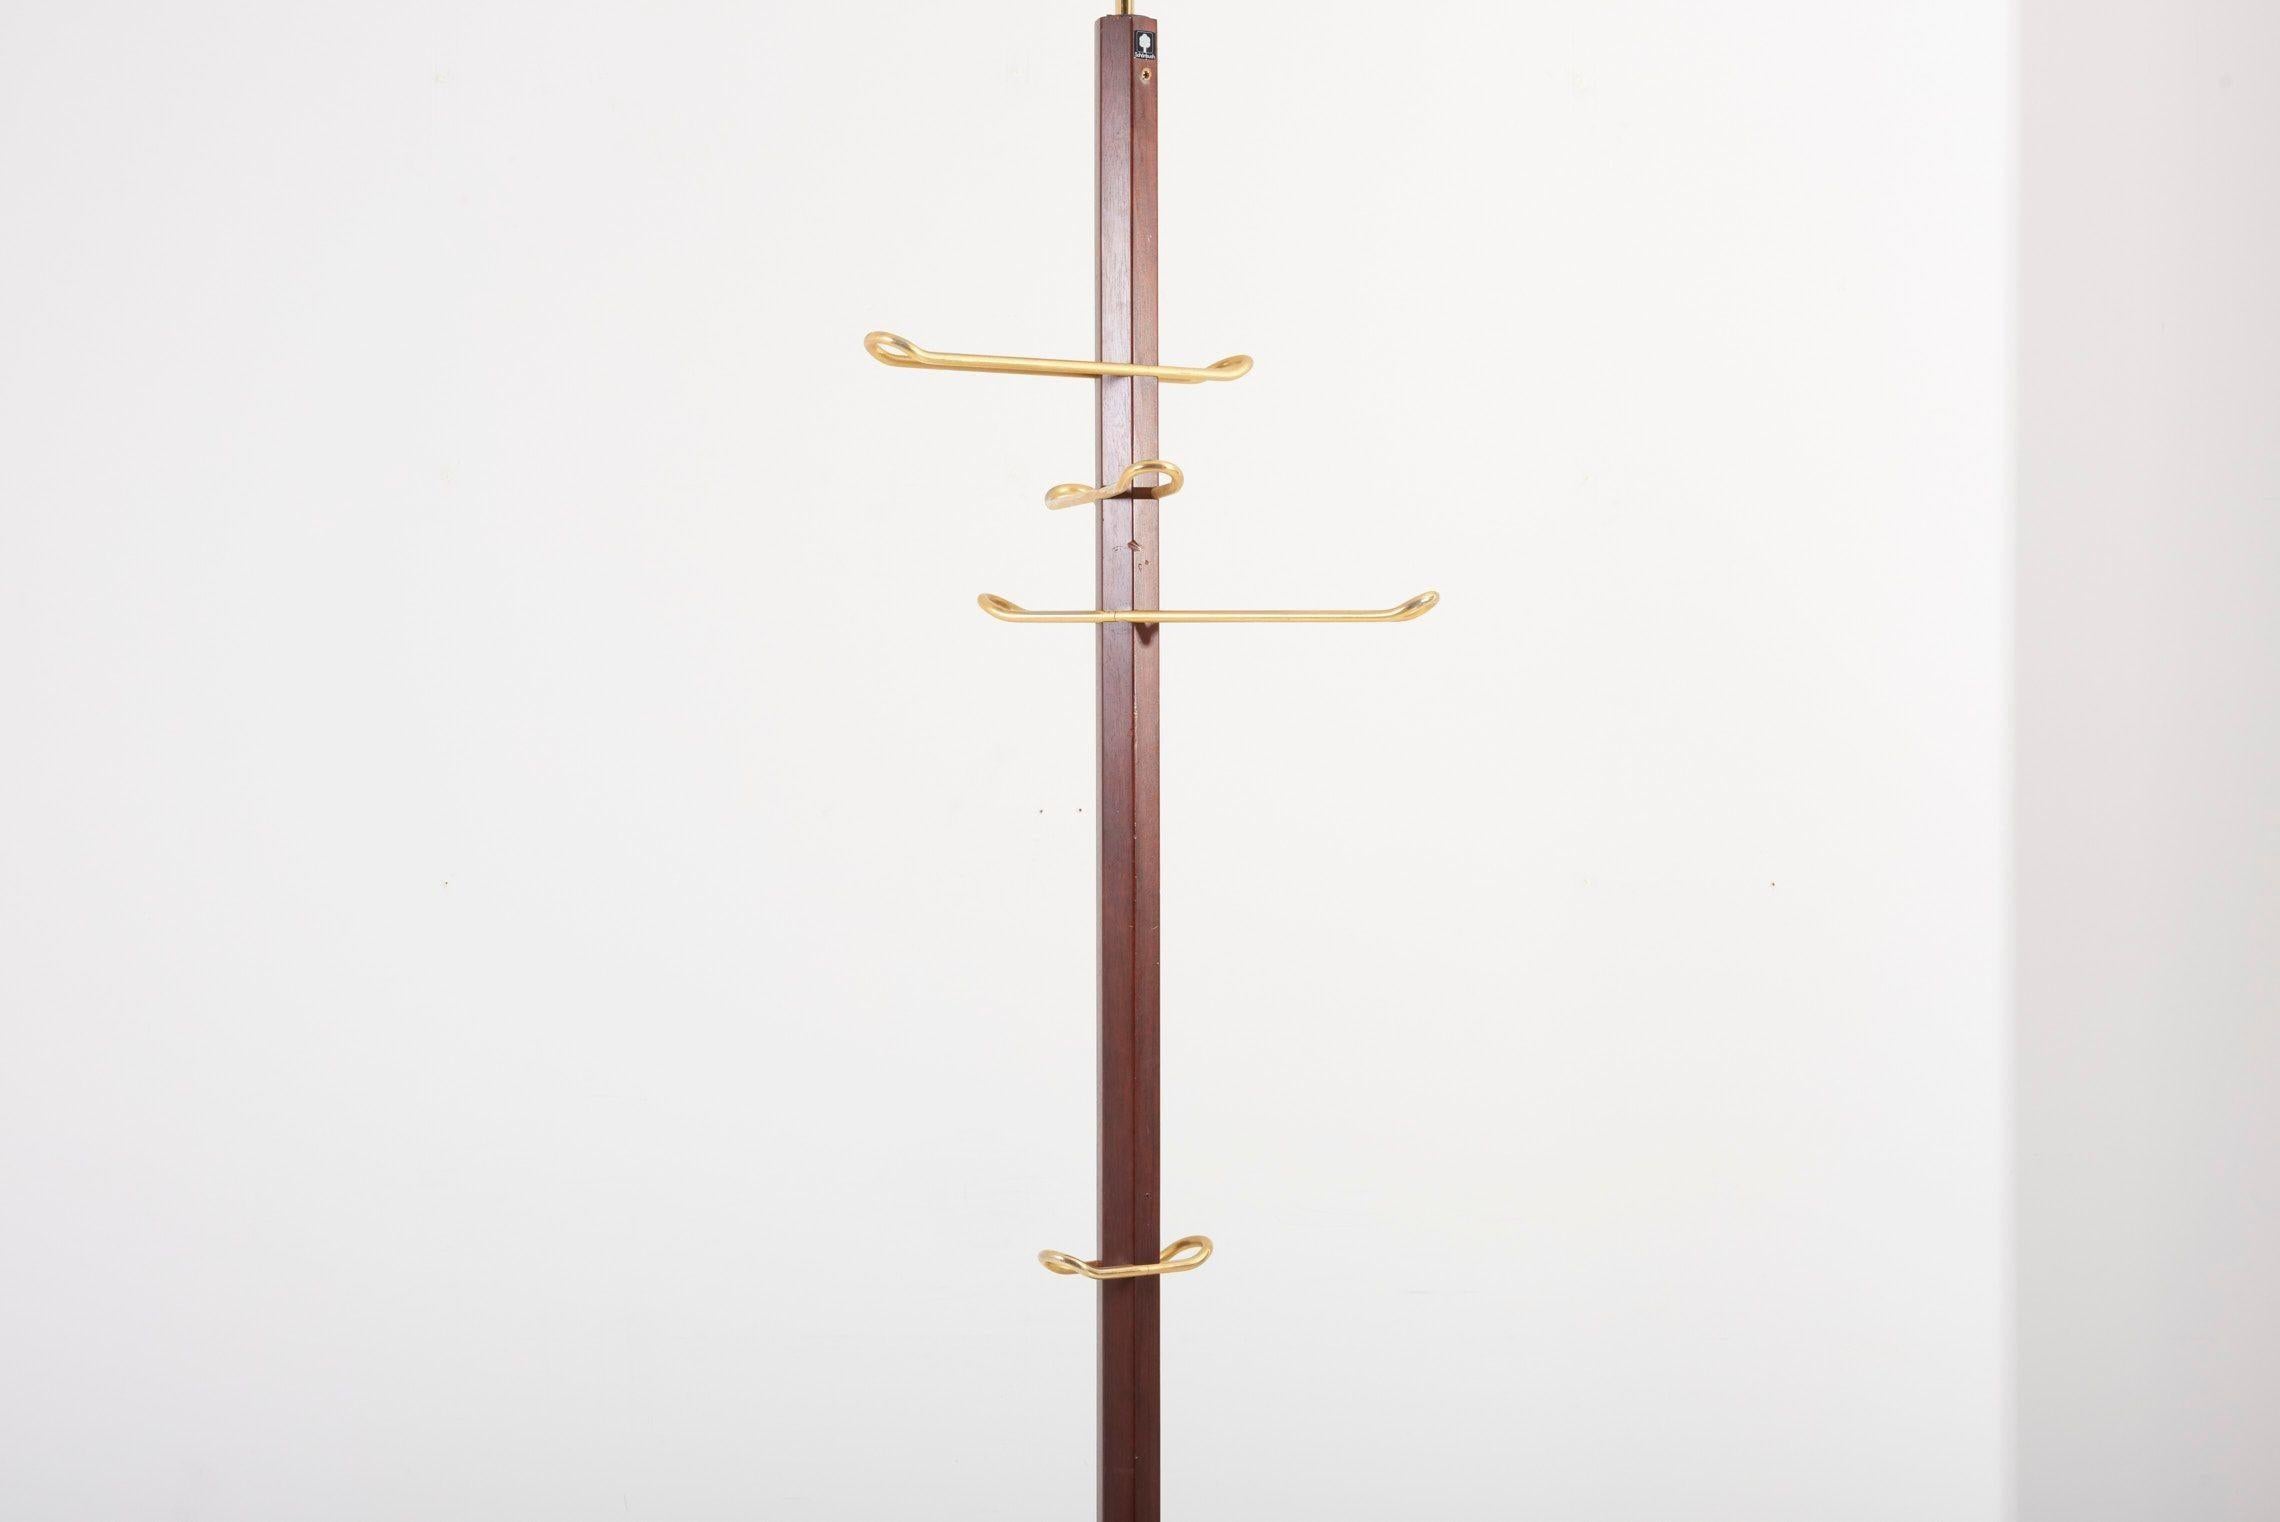 Coat Rack by Schönbuch with teak base and brass elements. Labeled. The max, height is 320cm. The teak has some nicks and dents.